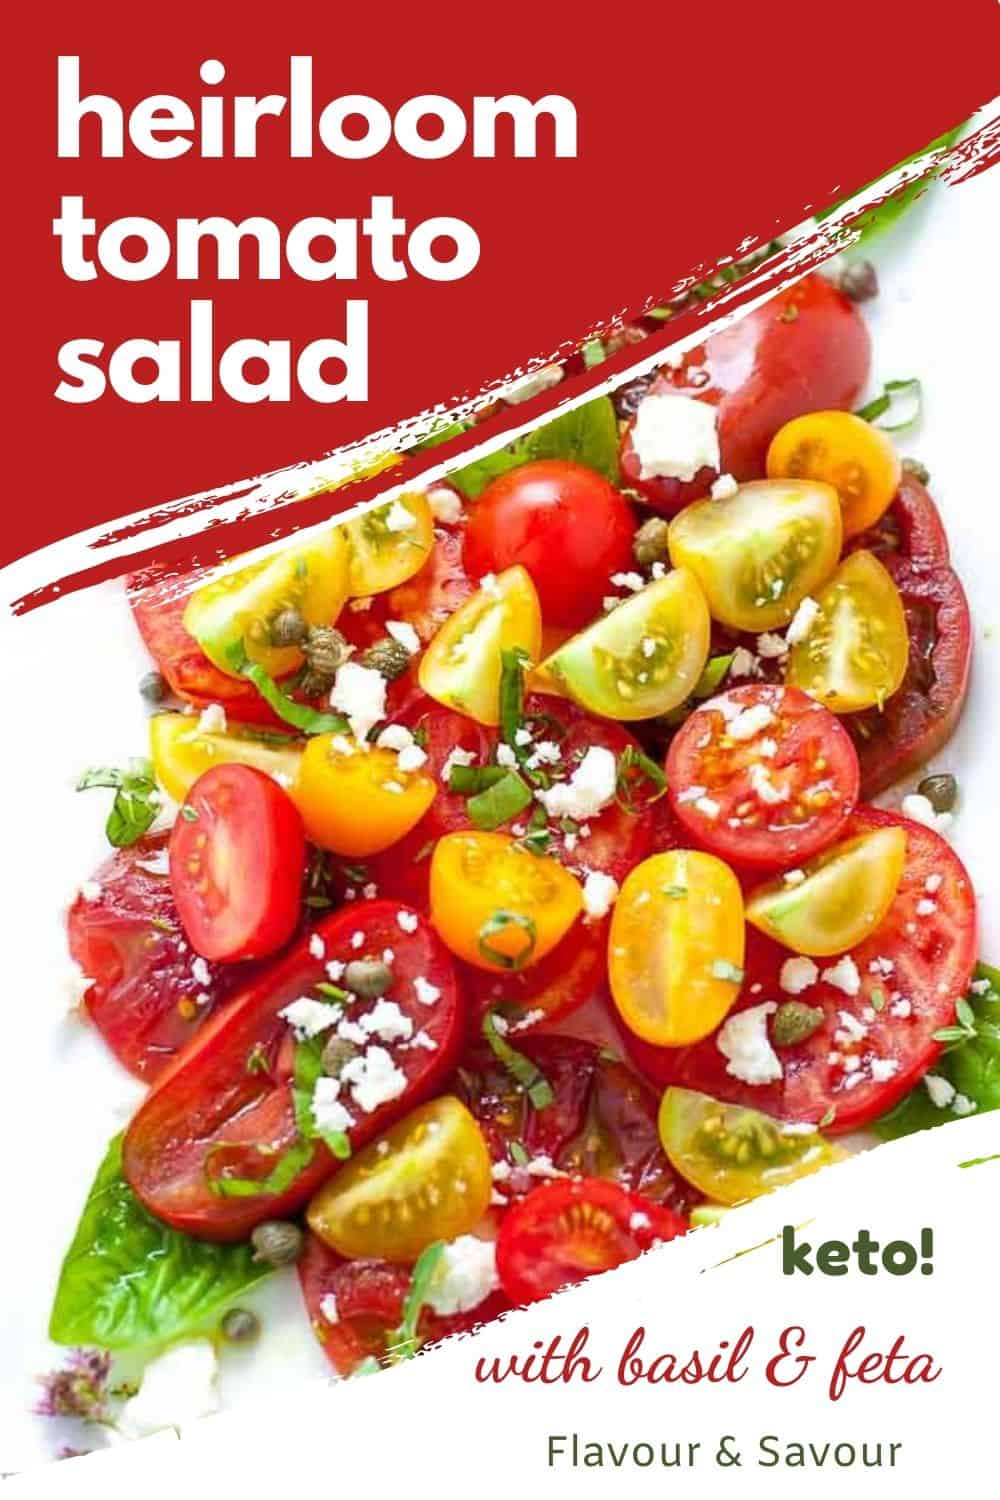 Heirloom Tomato Salad with Basil, Capers and Feta - Flavour and Savour